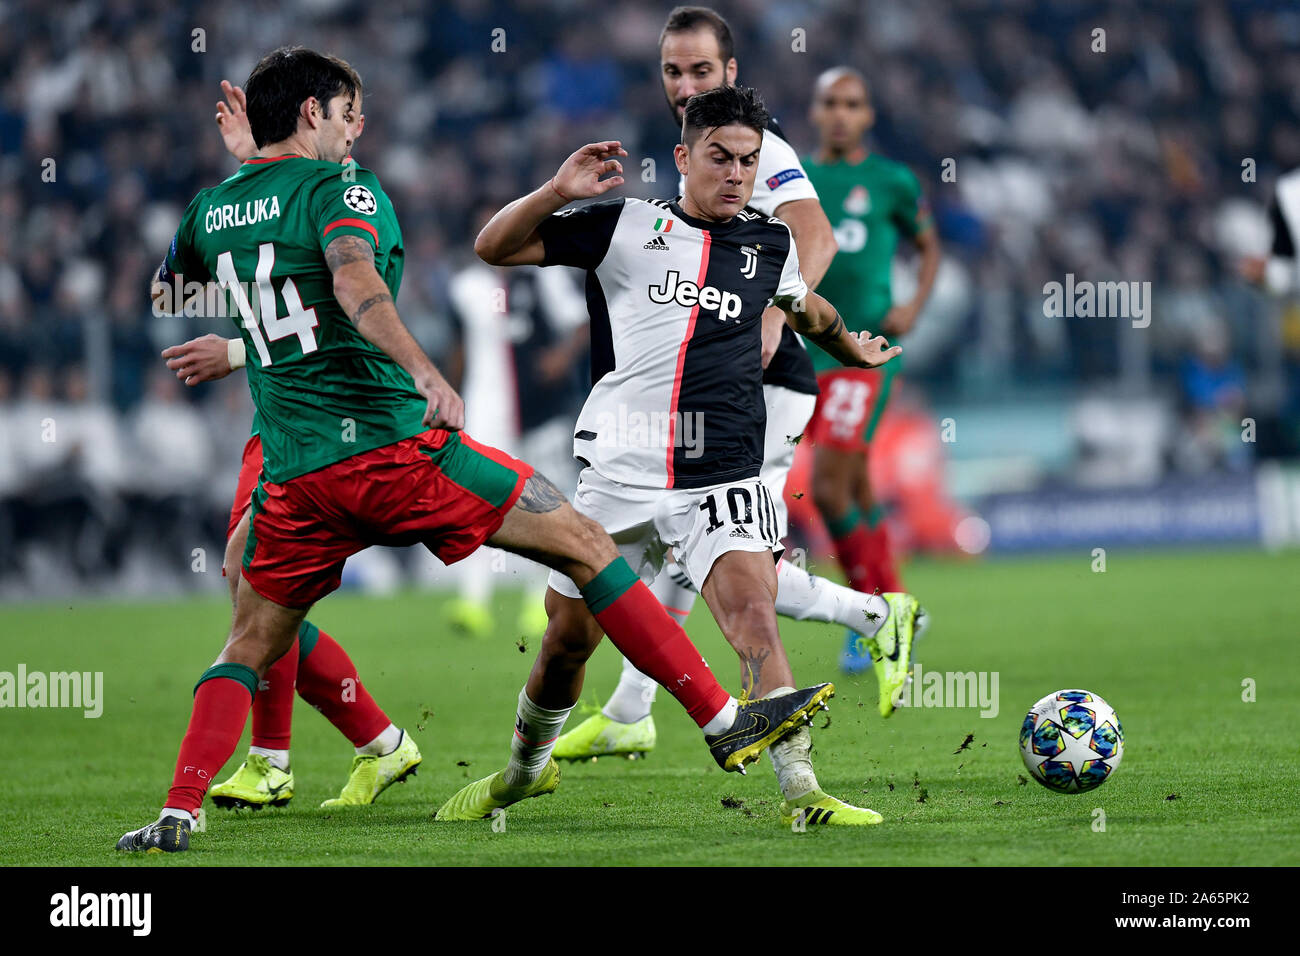 Turin, Italy. 22nd Oct, 2019. Paulo Dybala of Juventus lis challenged by Vedran Corluka of Lokomotiv Moscow during the UEFA Champions League group stage match between Juventus and Lokomotiv Moscow at the Juventus Stadium, Turin, Italy on 22 October 2019. Photo by Giuseppe Maffia. Credit: UK Sports Pics Ltd/Alamy Live News Stock Photo